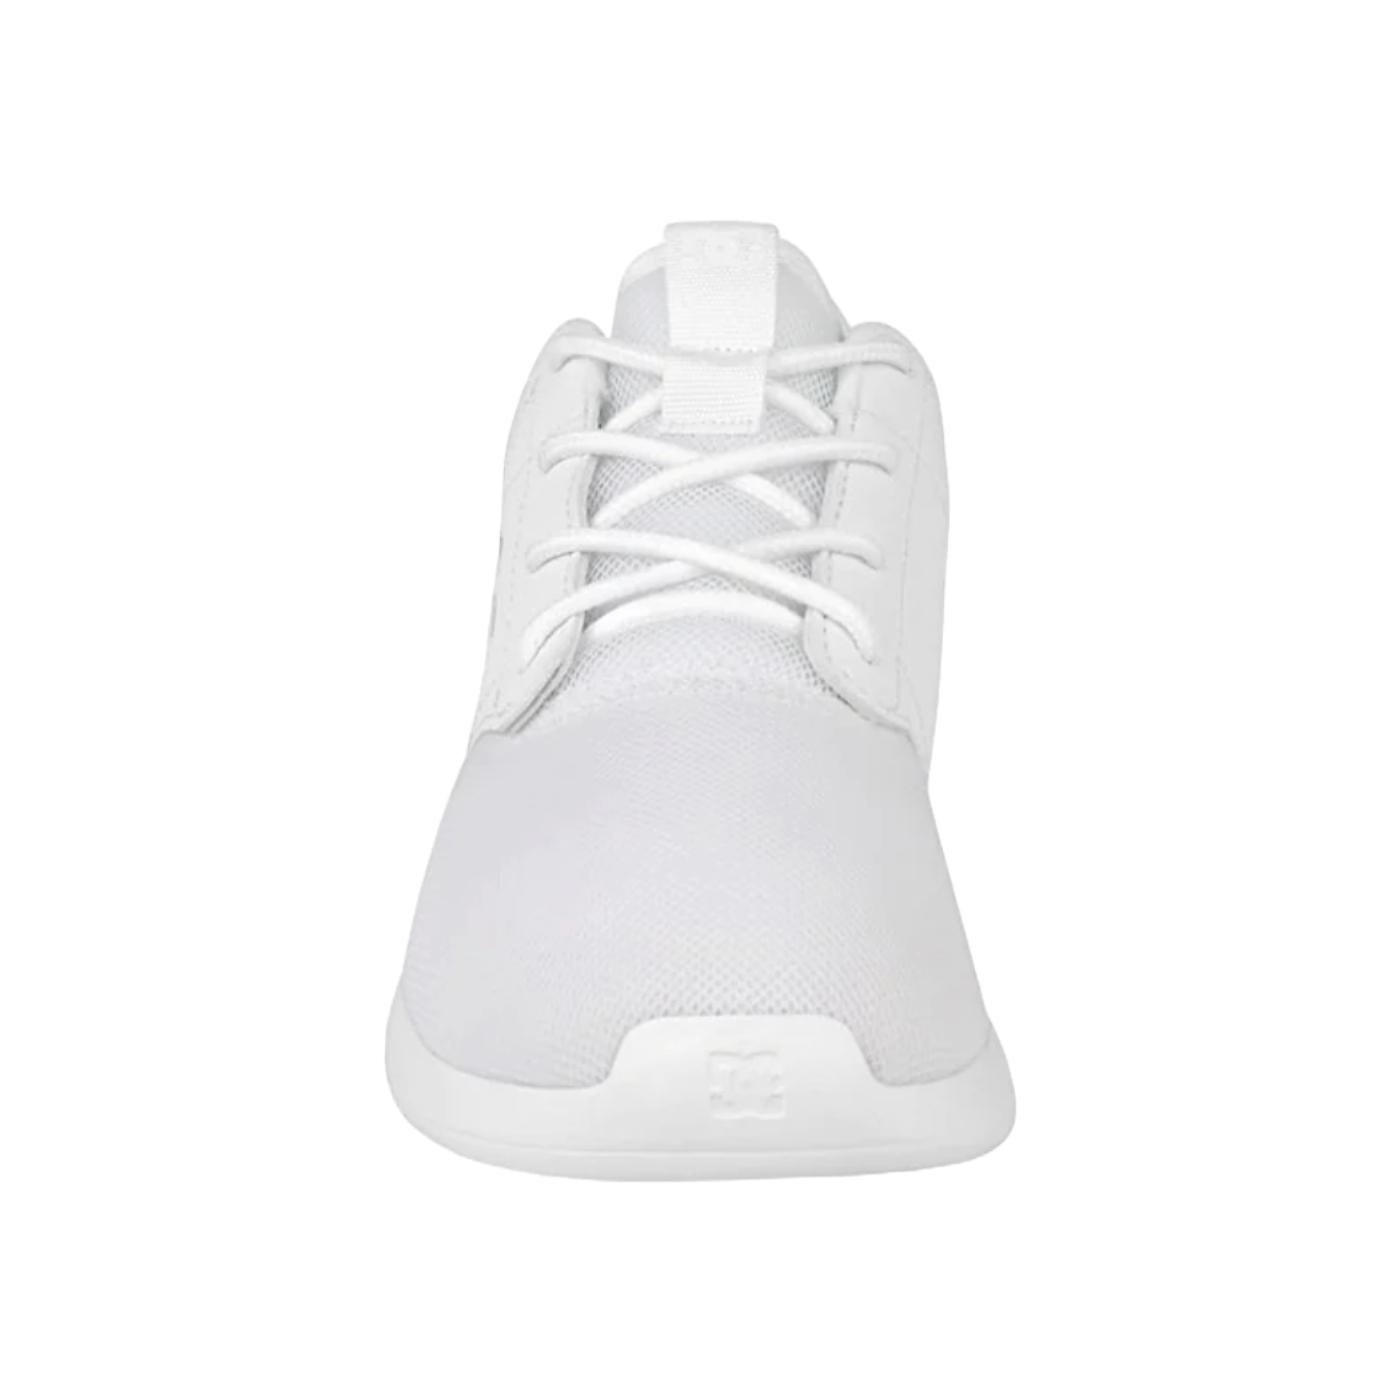 TENIS DC SHOES MUJER BLANCO DC SHOES MIDWAY ADJS700100WW0